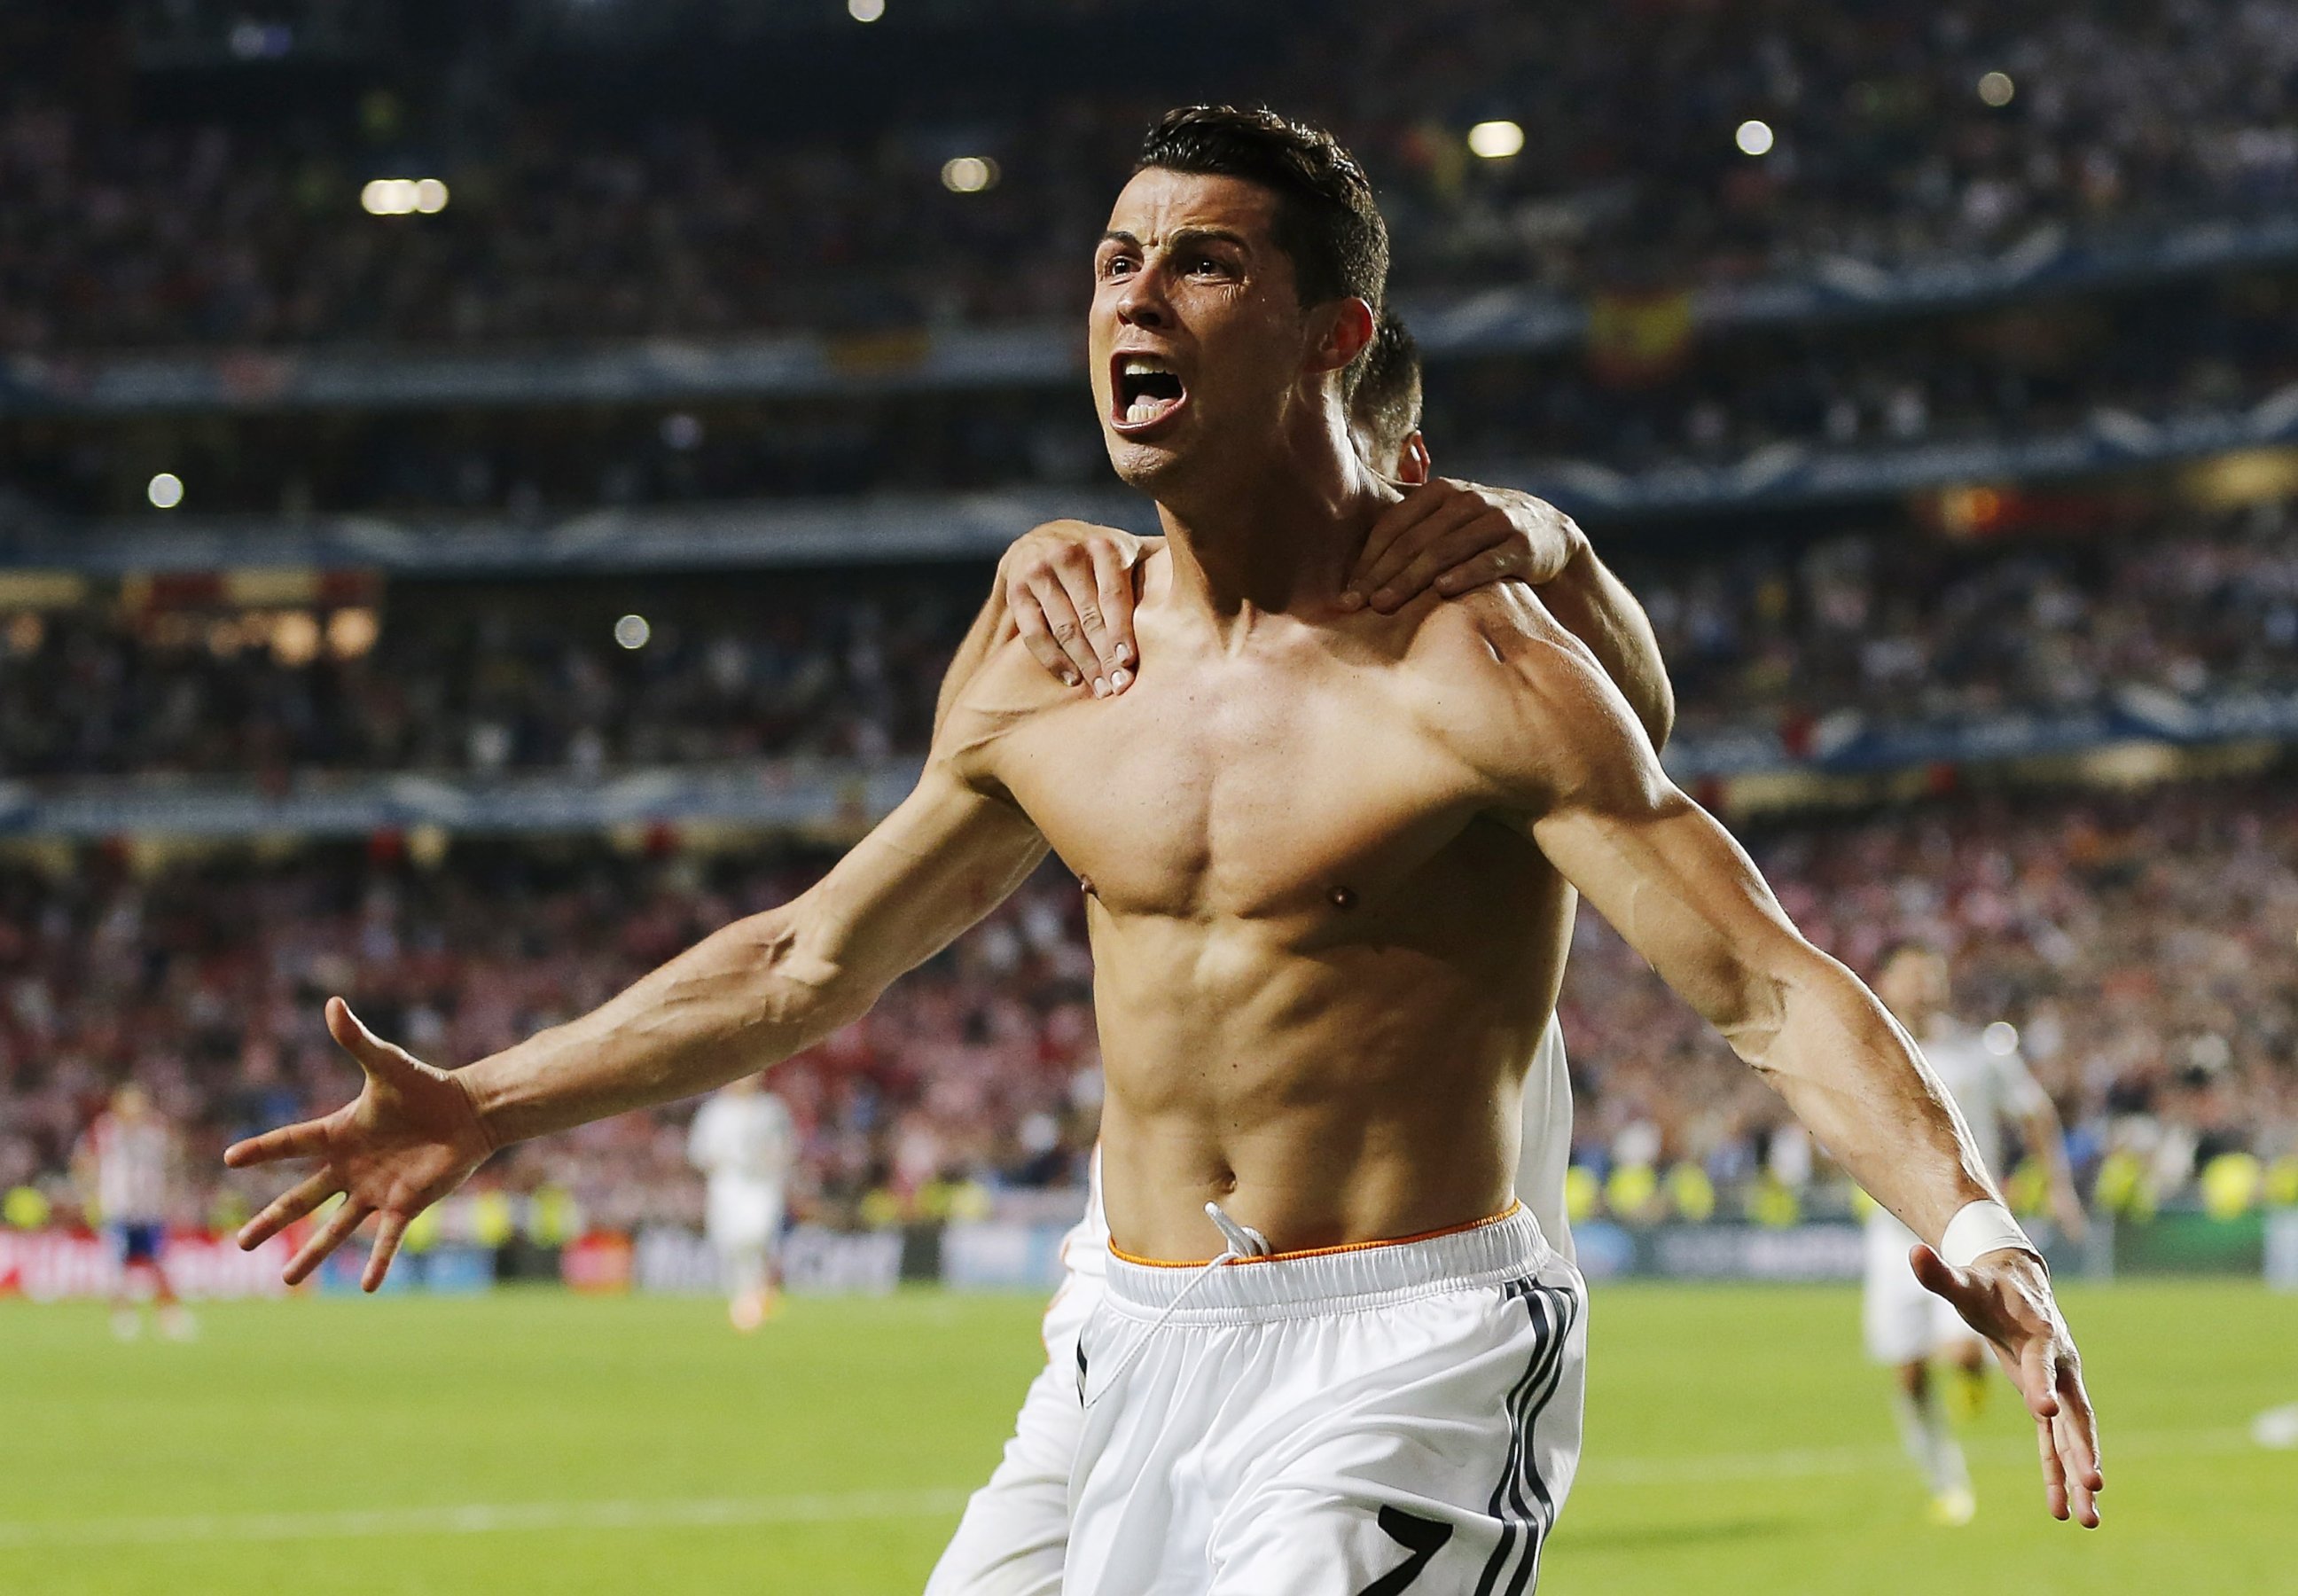 PHOTO: Cristiano Ronaldo of Real Madrid celebrates scoring their fourth goal from the penalty spot during the UEFA Champions League Final between Real Madrid and Atletico de Madrid at Estadio da Luz, May 24, 2014 in Lisbon, Portugal.